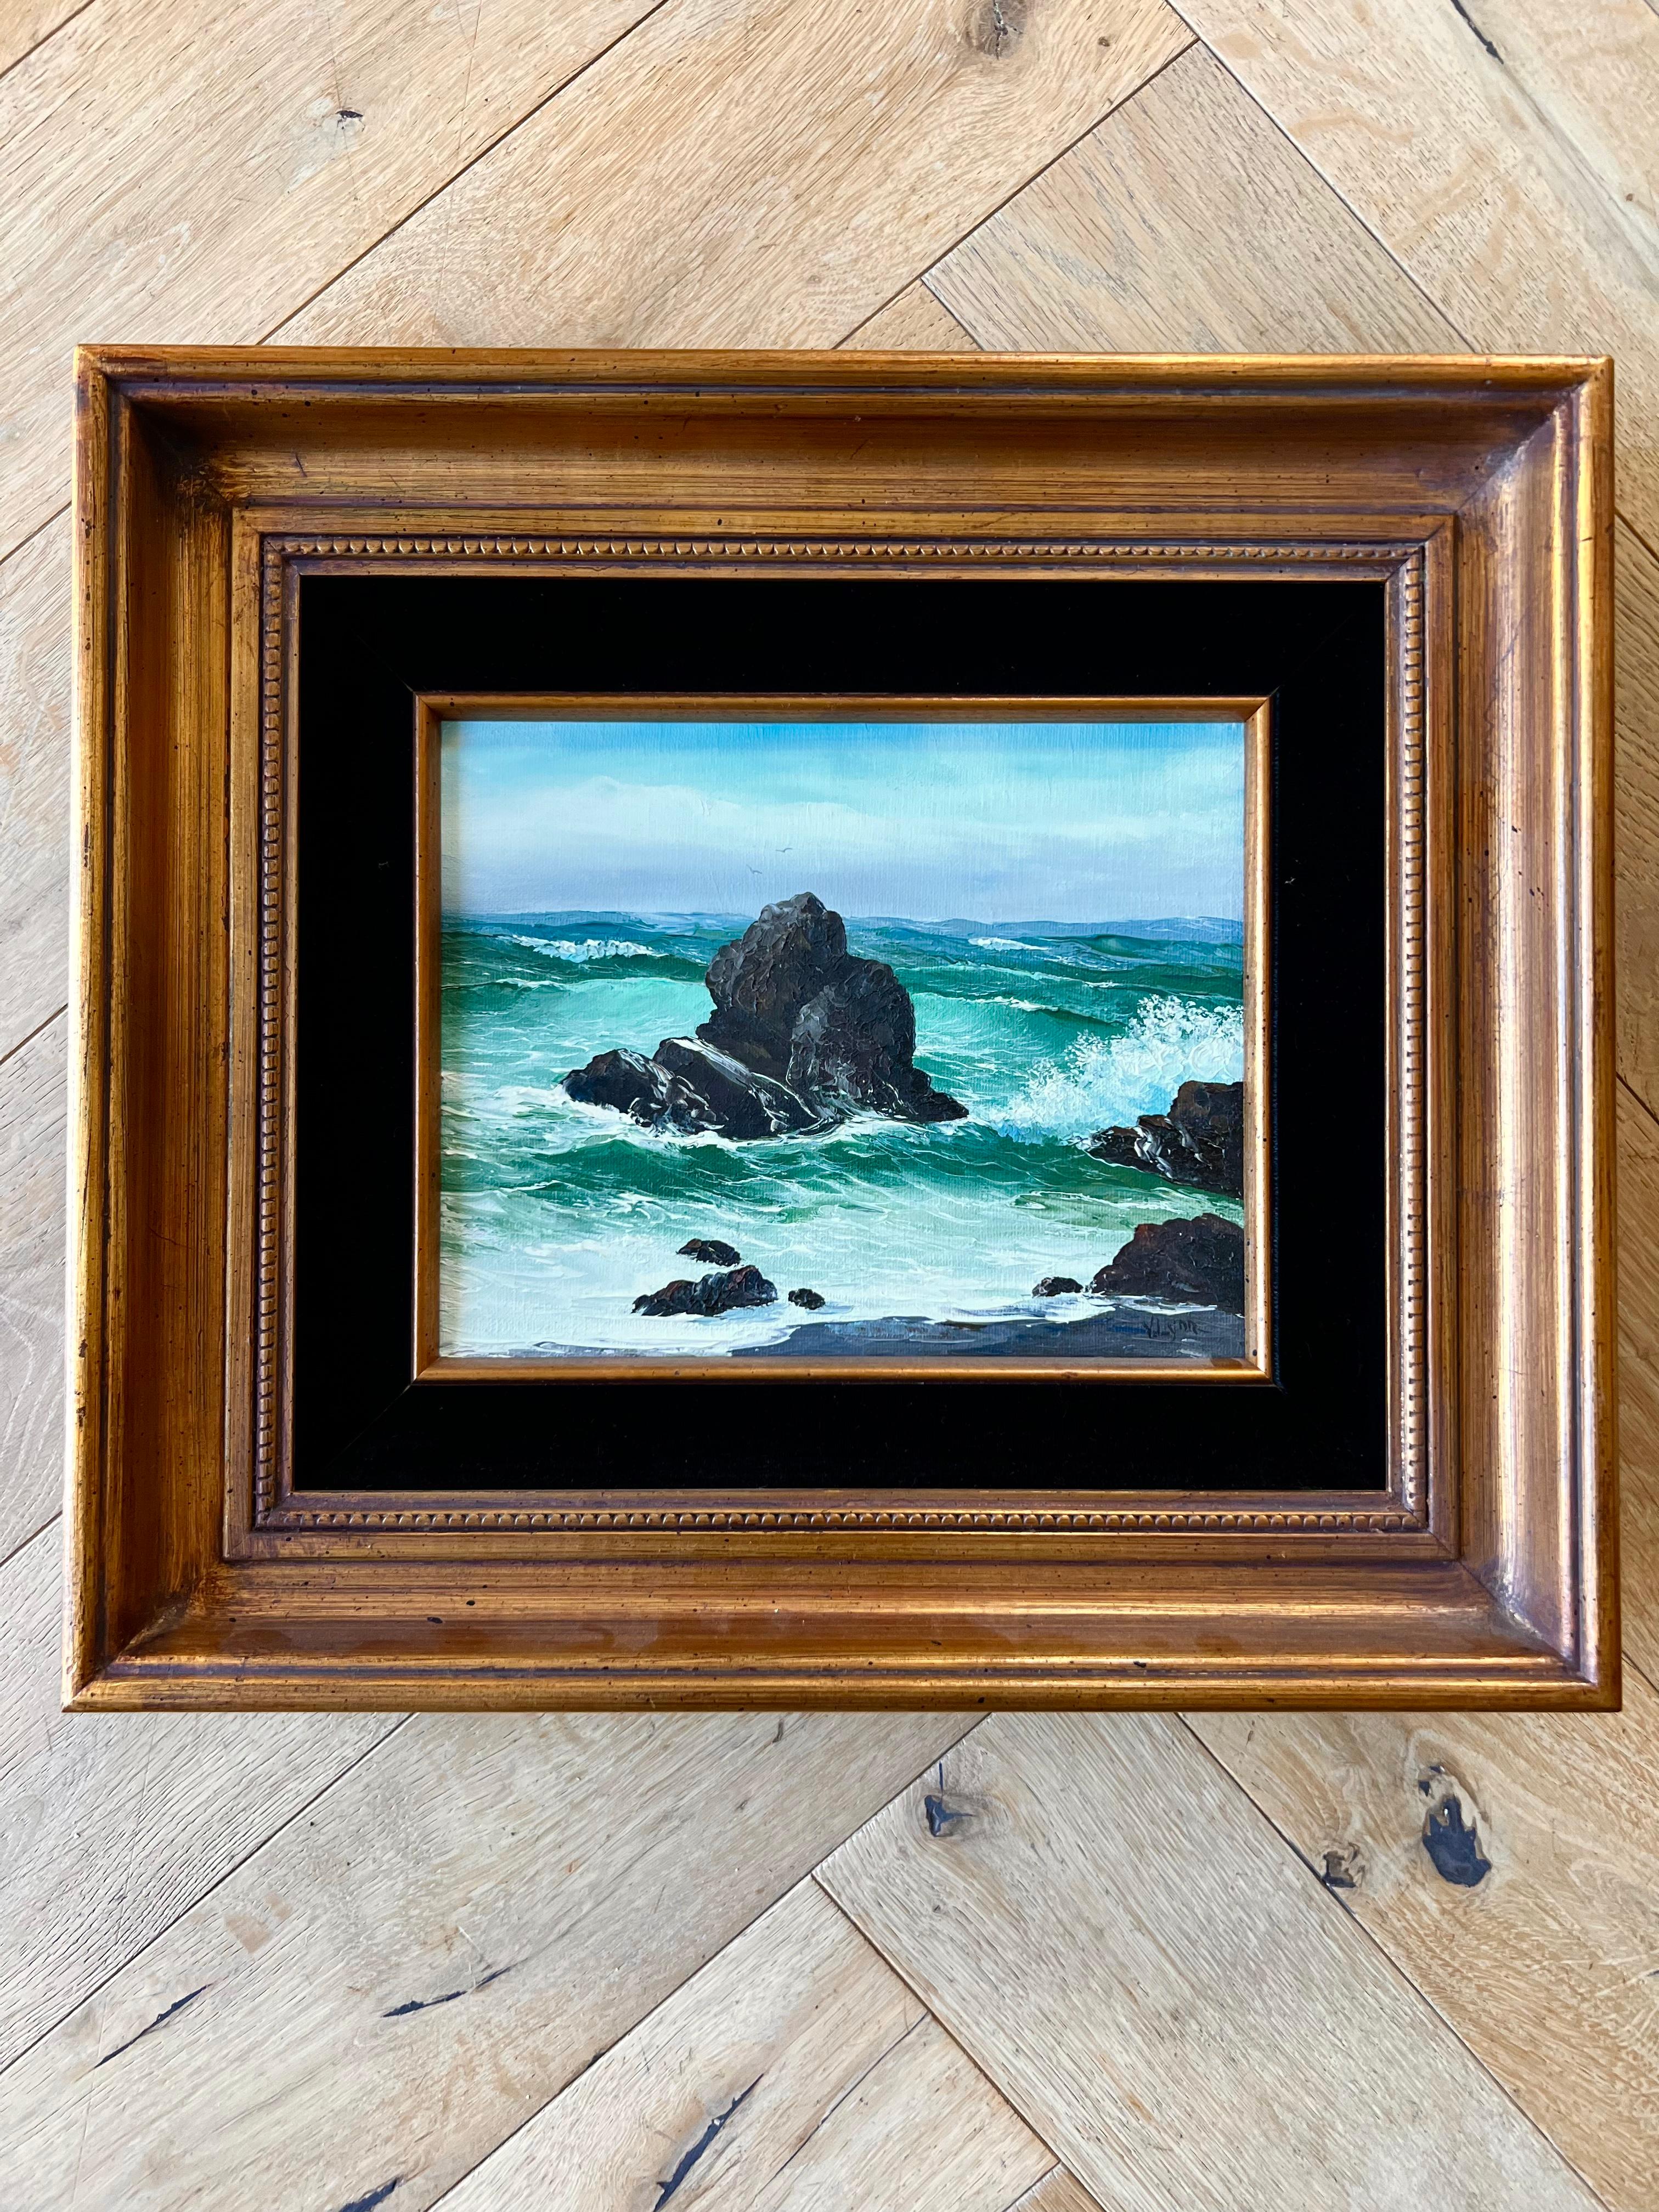 Crashing waves: a painting by Virginia Lynn, oil on canvas, 20th century. Expert brushwork from this American artist shows the tide crashing upon basalt rocks near a shore. At first glance this painting is a tidy pastoral piece, but the ocean - vast